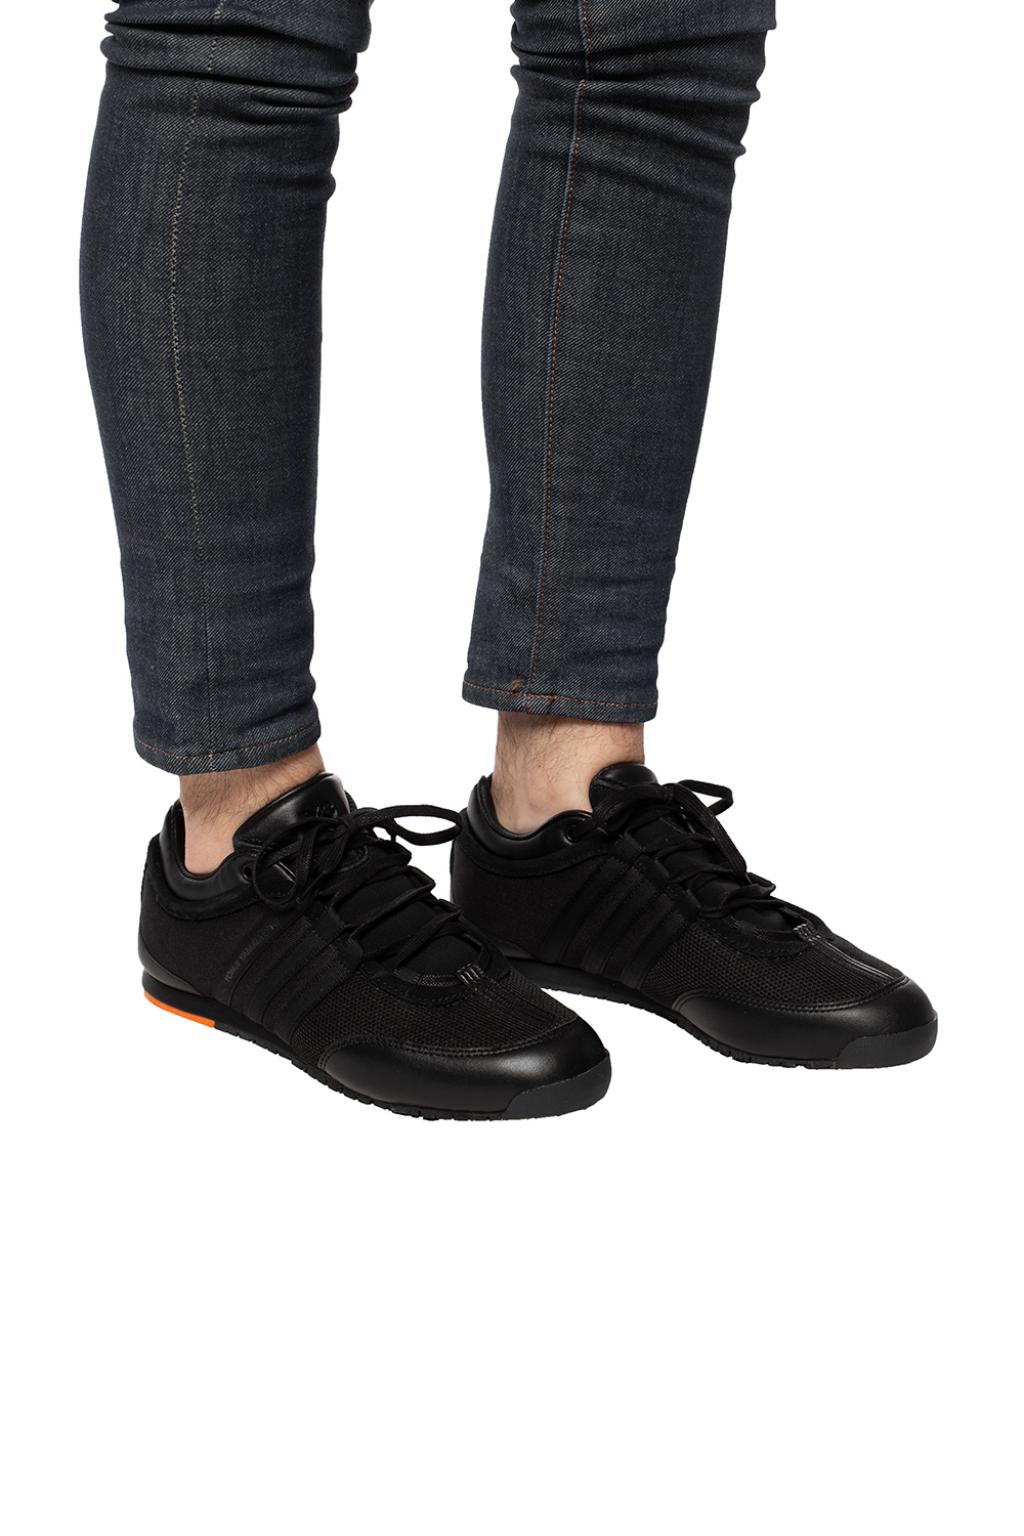 y3 boxing trainers black and orange